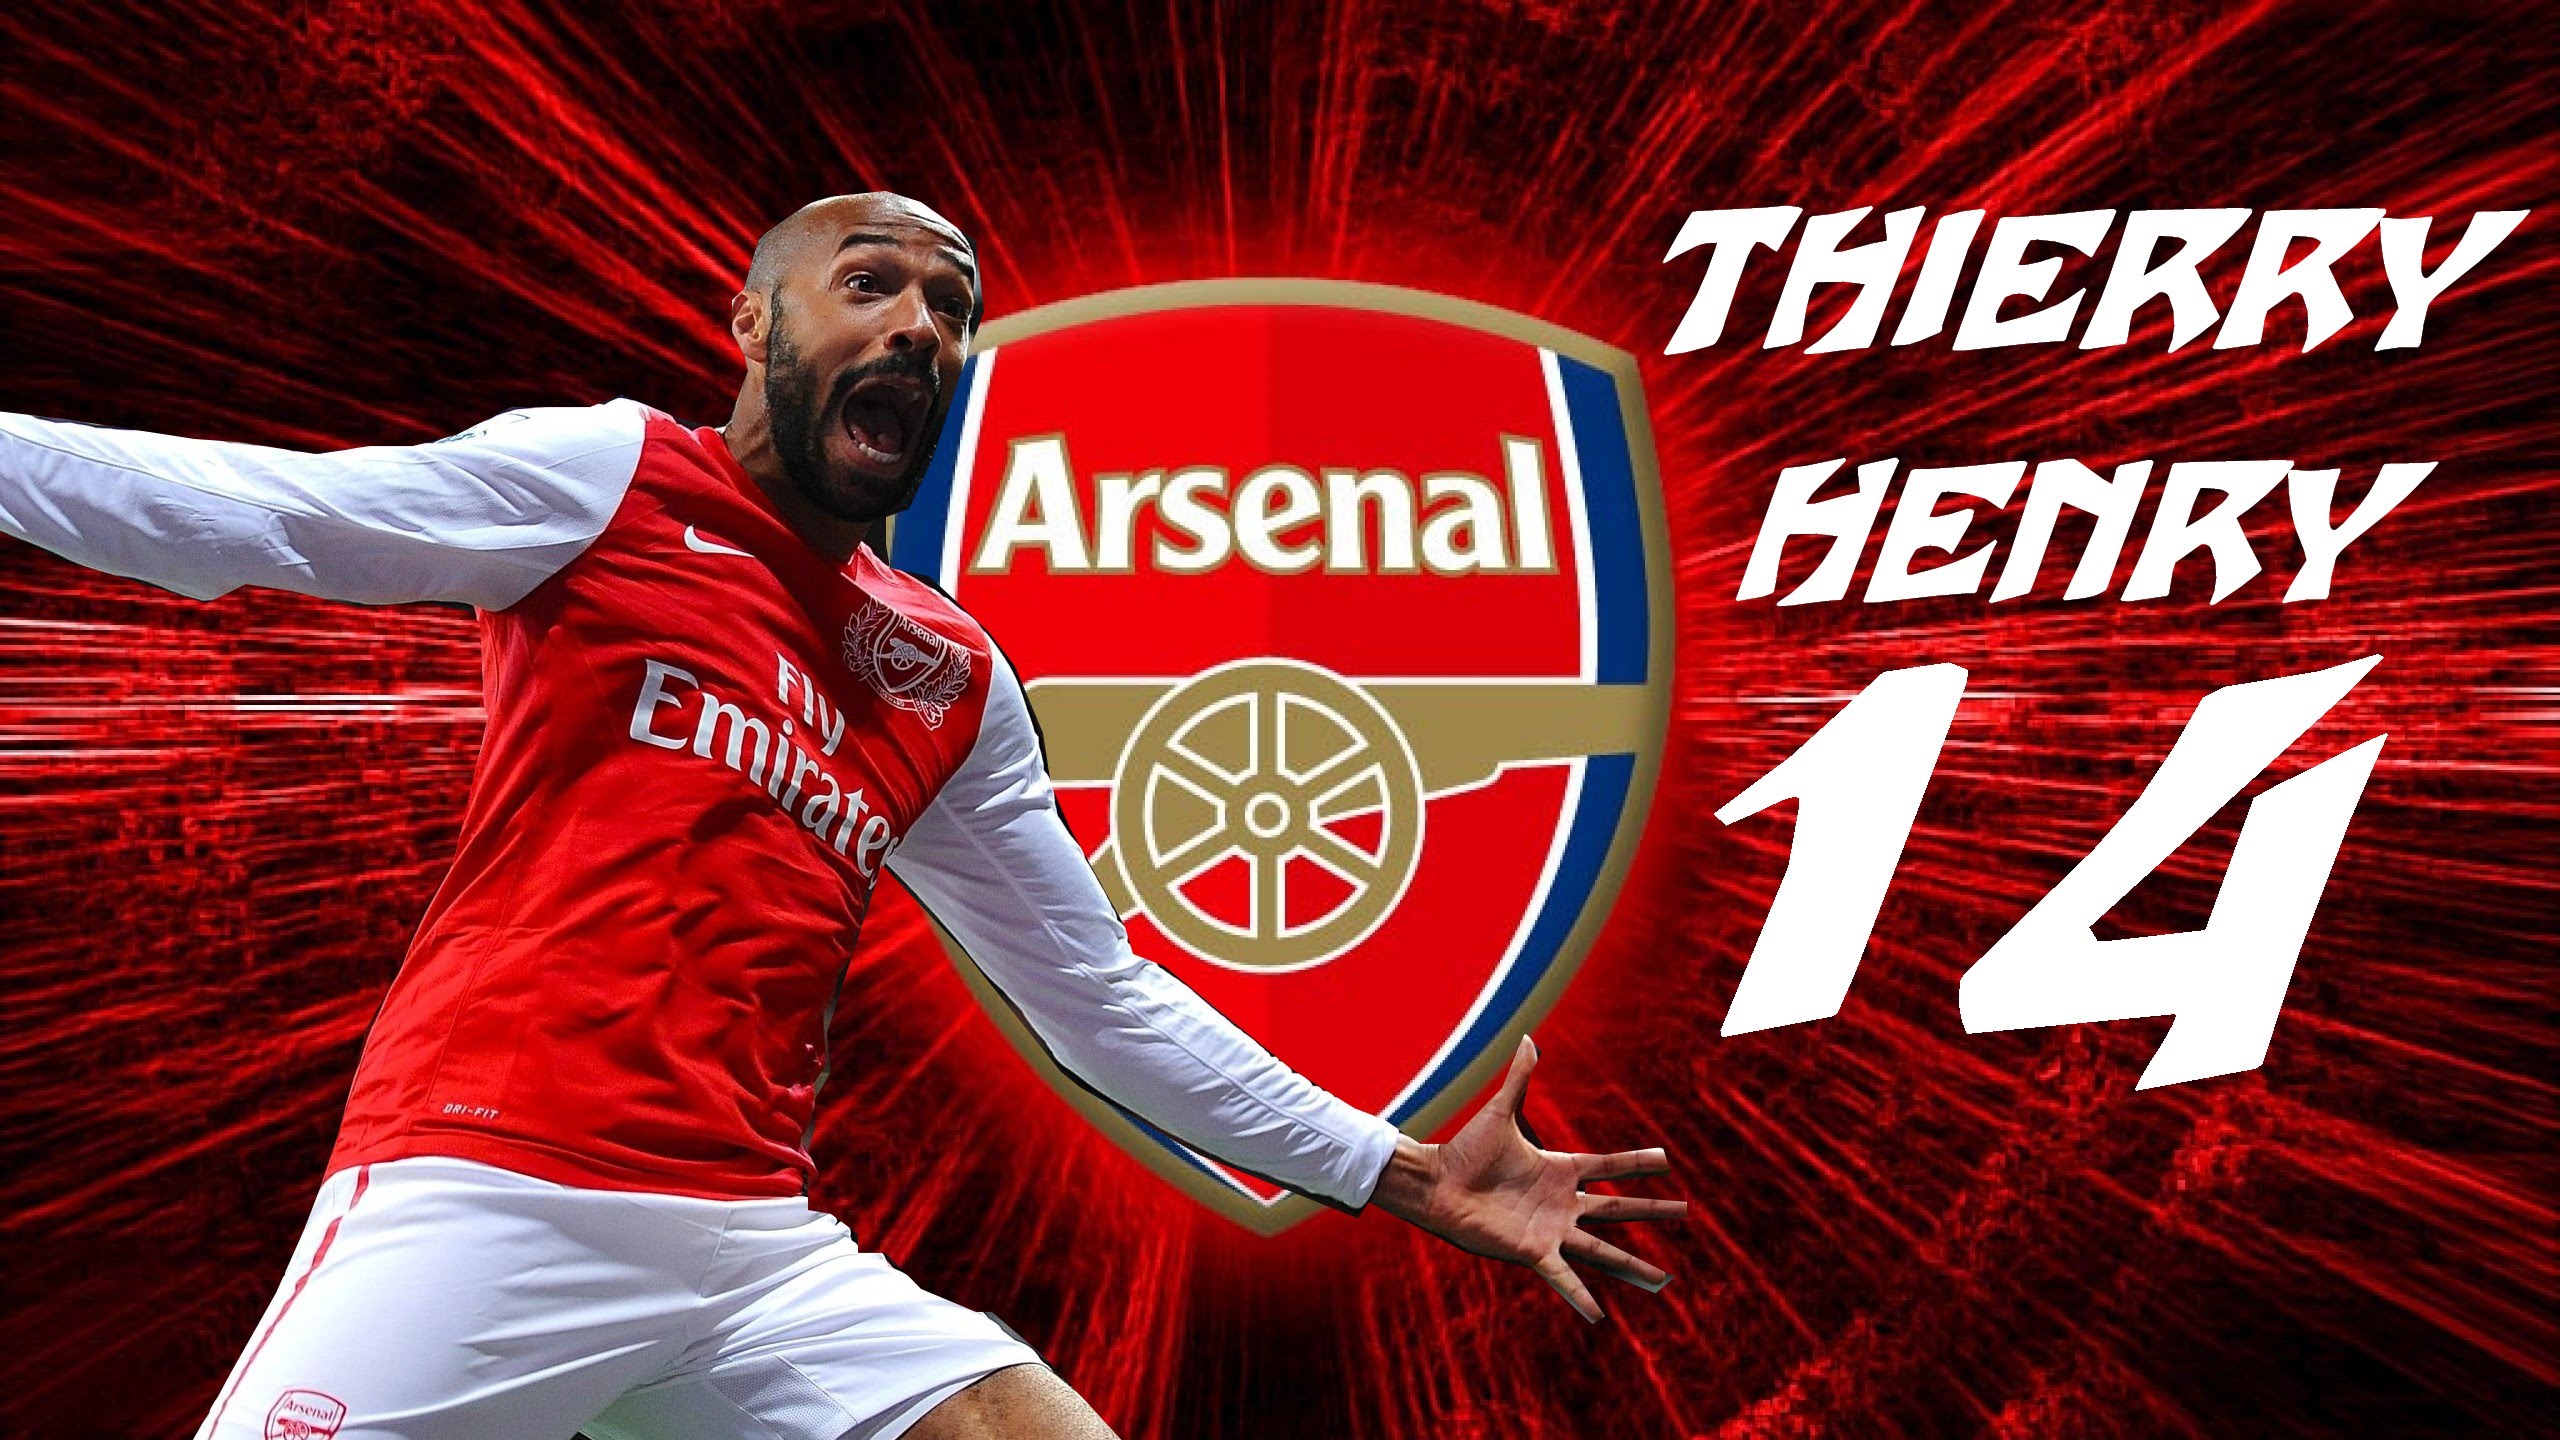 Thierry Henry Arsenal Wallpapers - Thierry Henry Arsenal Wallpaper Hd , HD Wallpaper & Backgrounds